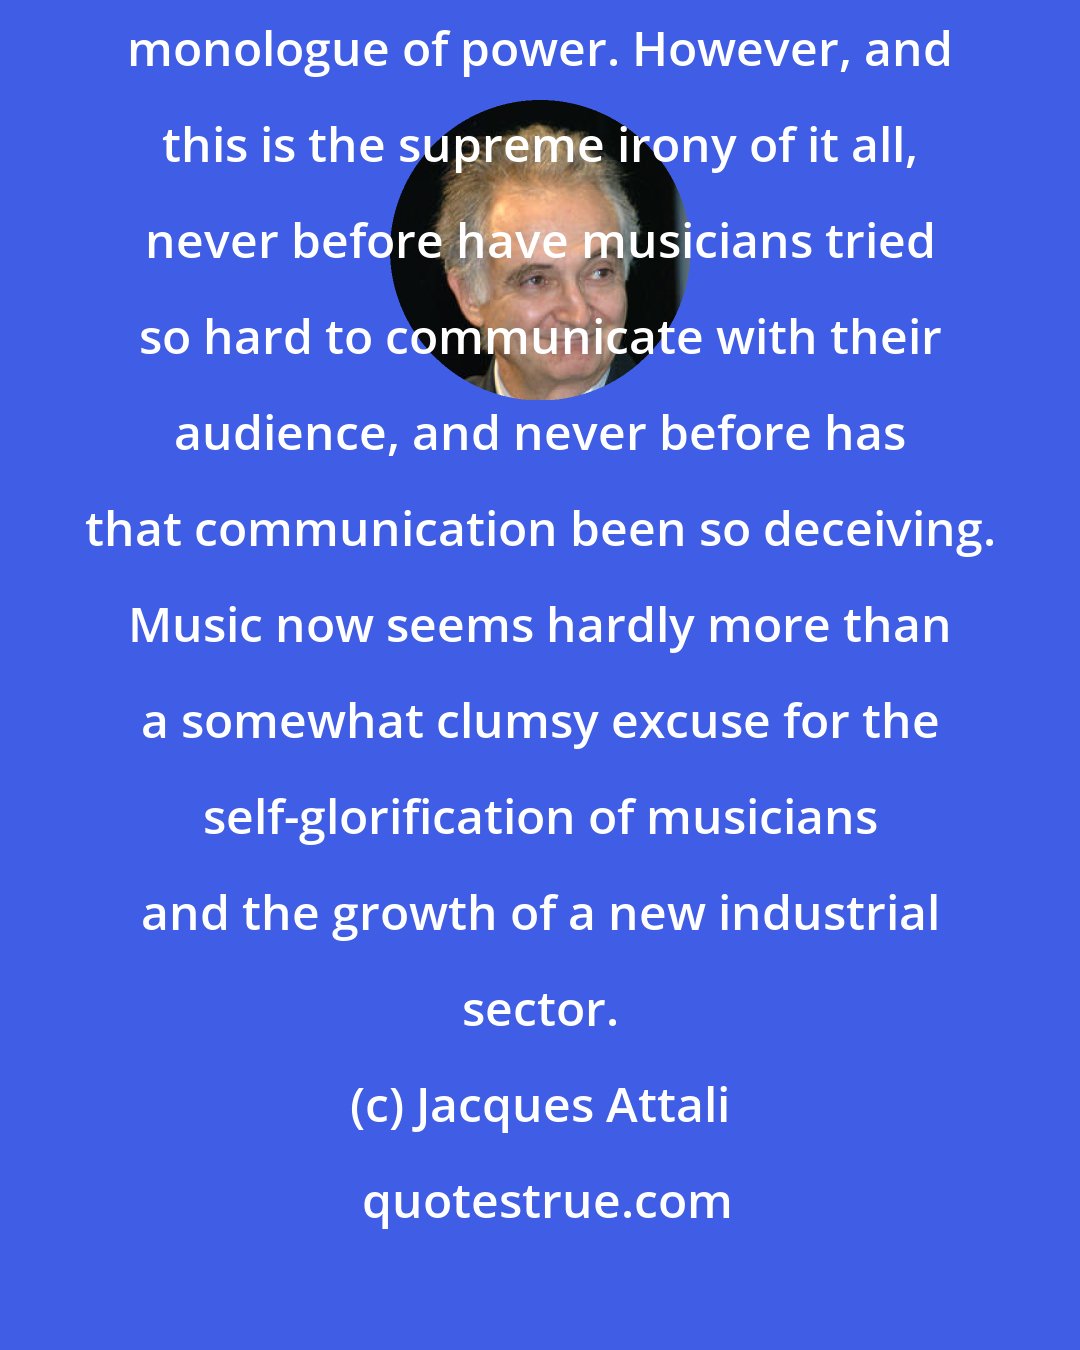 Jacques Attali: What is called music today is all too often only a disguise for the monologue of power. However, and this is the supreme irony of it all, never before have musicians tried so hard to communicate with their audience, and never before has that communication been so deceiving. Music now seems hardly more than a somewhat clumsy excuse for the self-glorification of musicians and the growth of a new industrial sector.